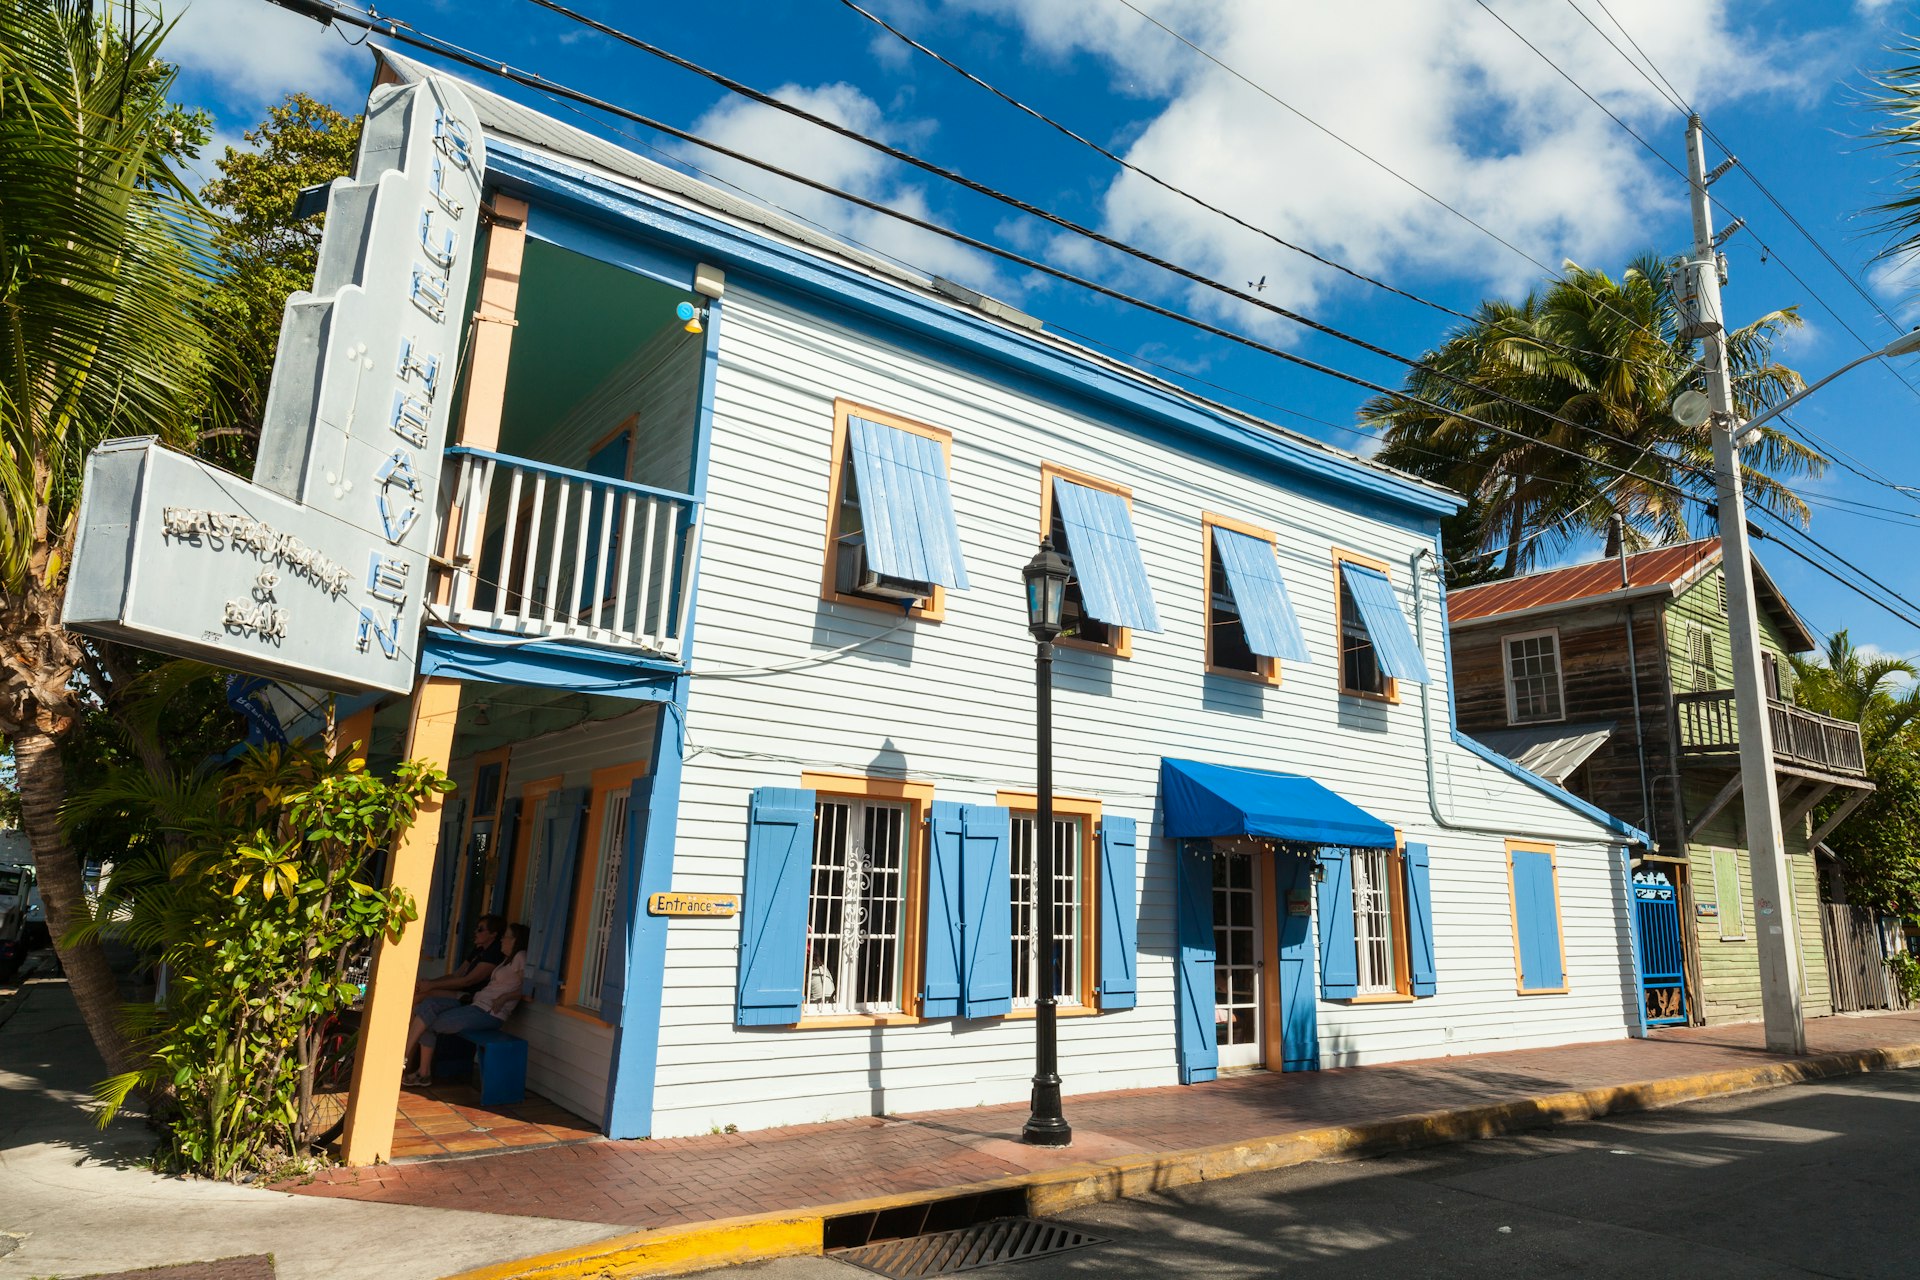 The iconic Blue Heaven restaurant in the historic Bahama Village area of Key West